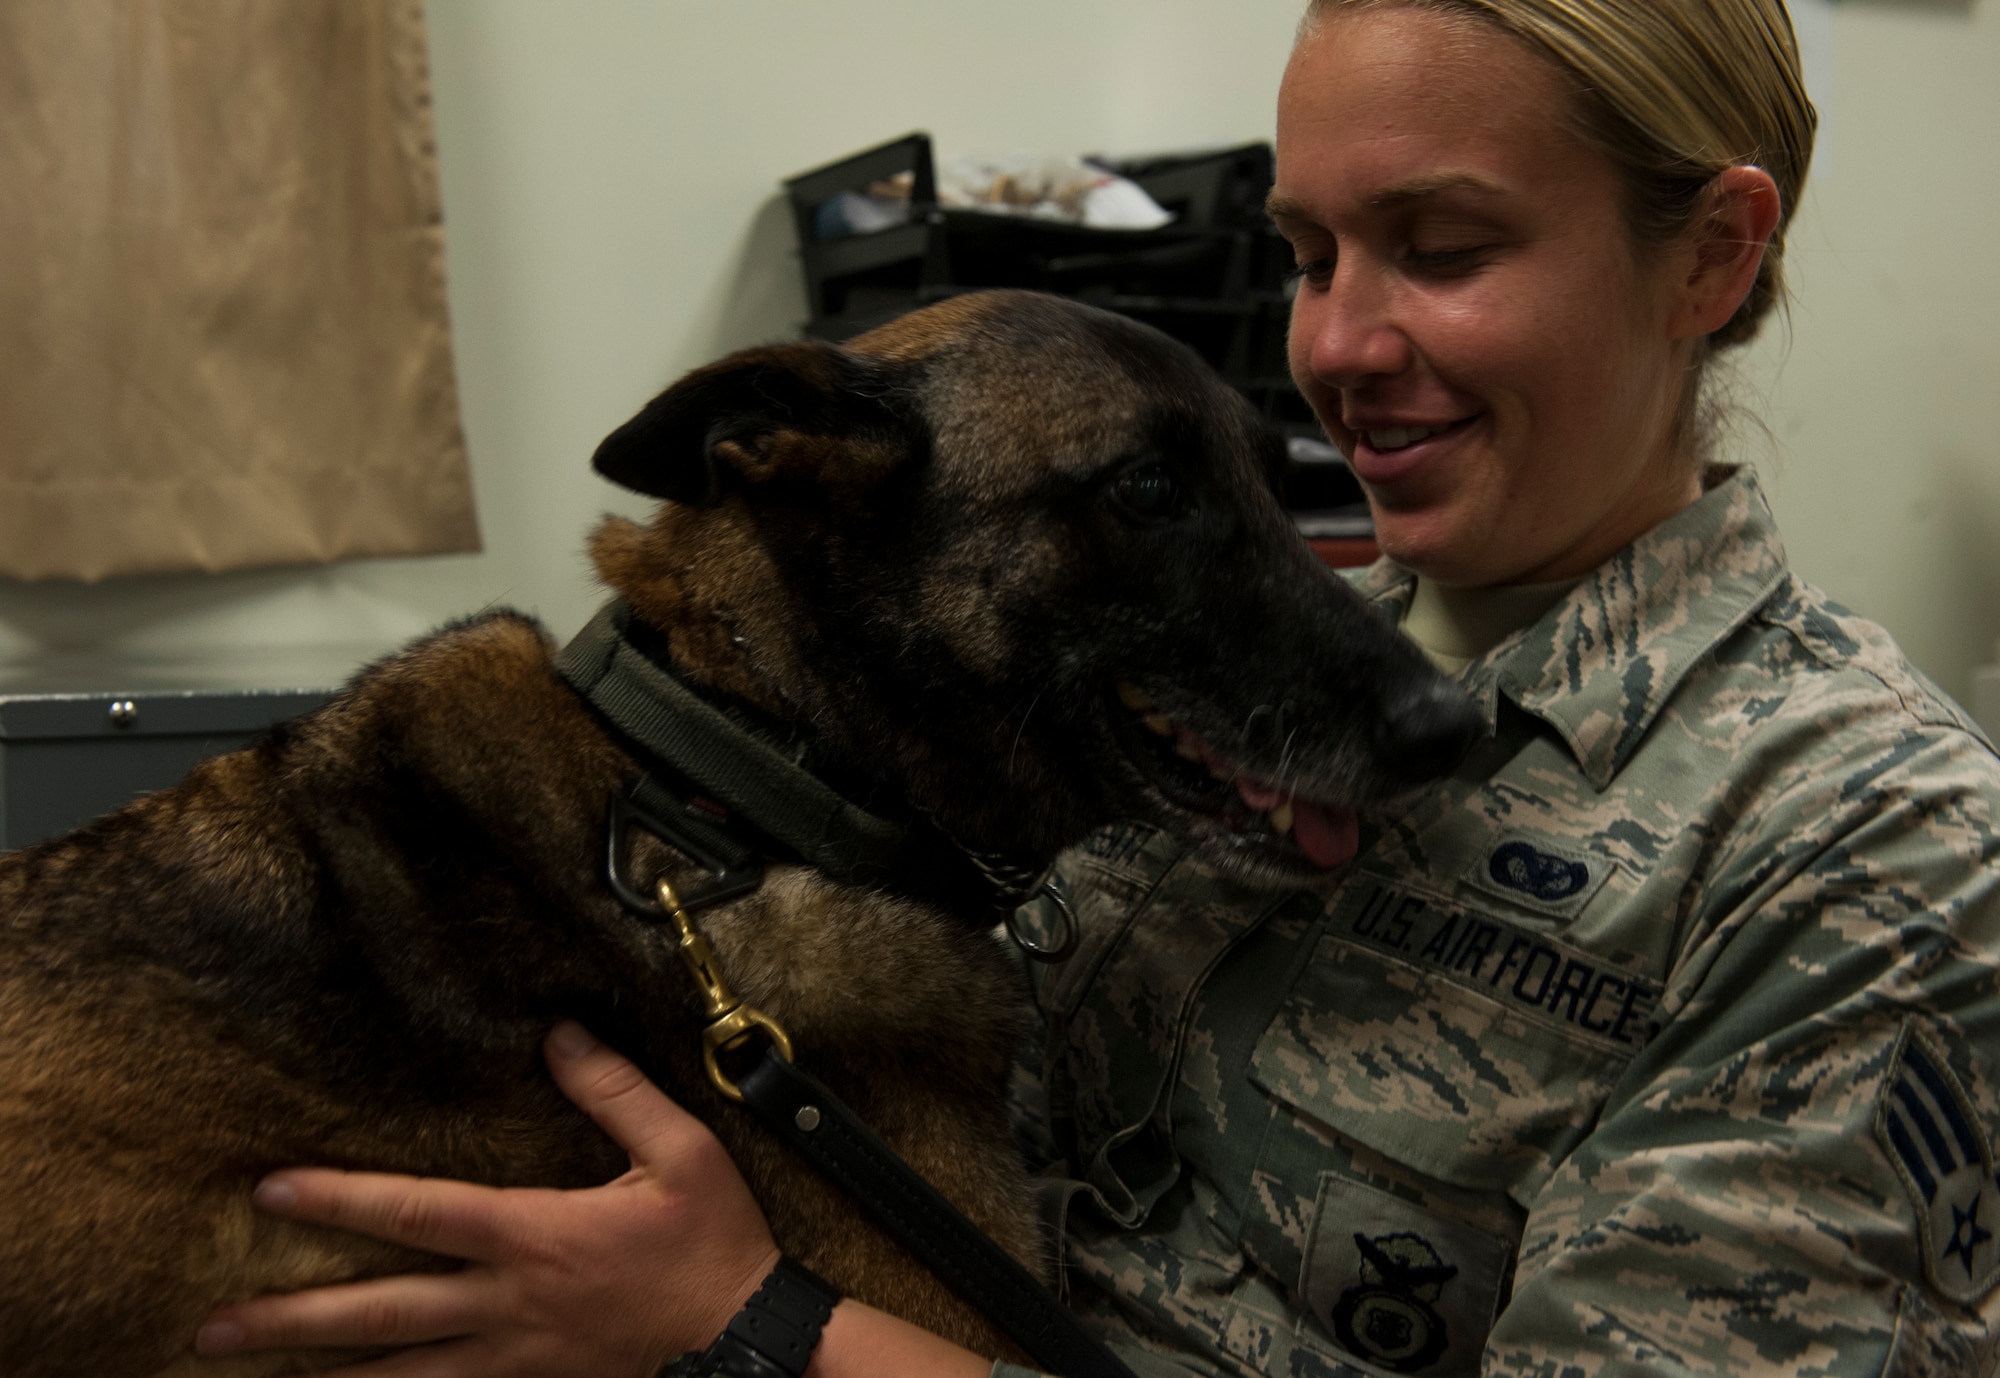 U.S. Air Force Senior Airman Rena Bissett, 18th Security Forces Squadron Military Working Dog handler, compliments her MWD, Judi, for good behavior April 13, 2016, at Kadena Air Base, Japan. MWDs are trained to work with their handlers and obey their commands. (U.S. Air Force photo by Airman 1st Class Lynette M. Rolen)